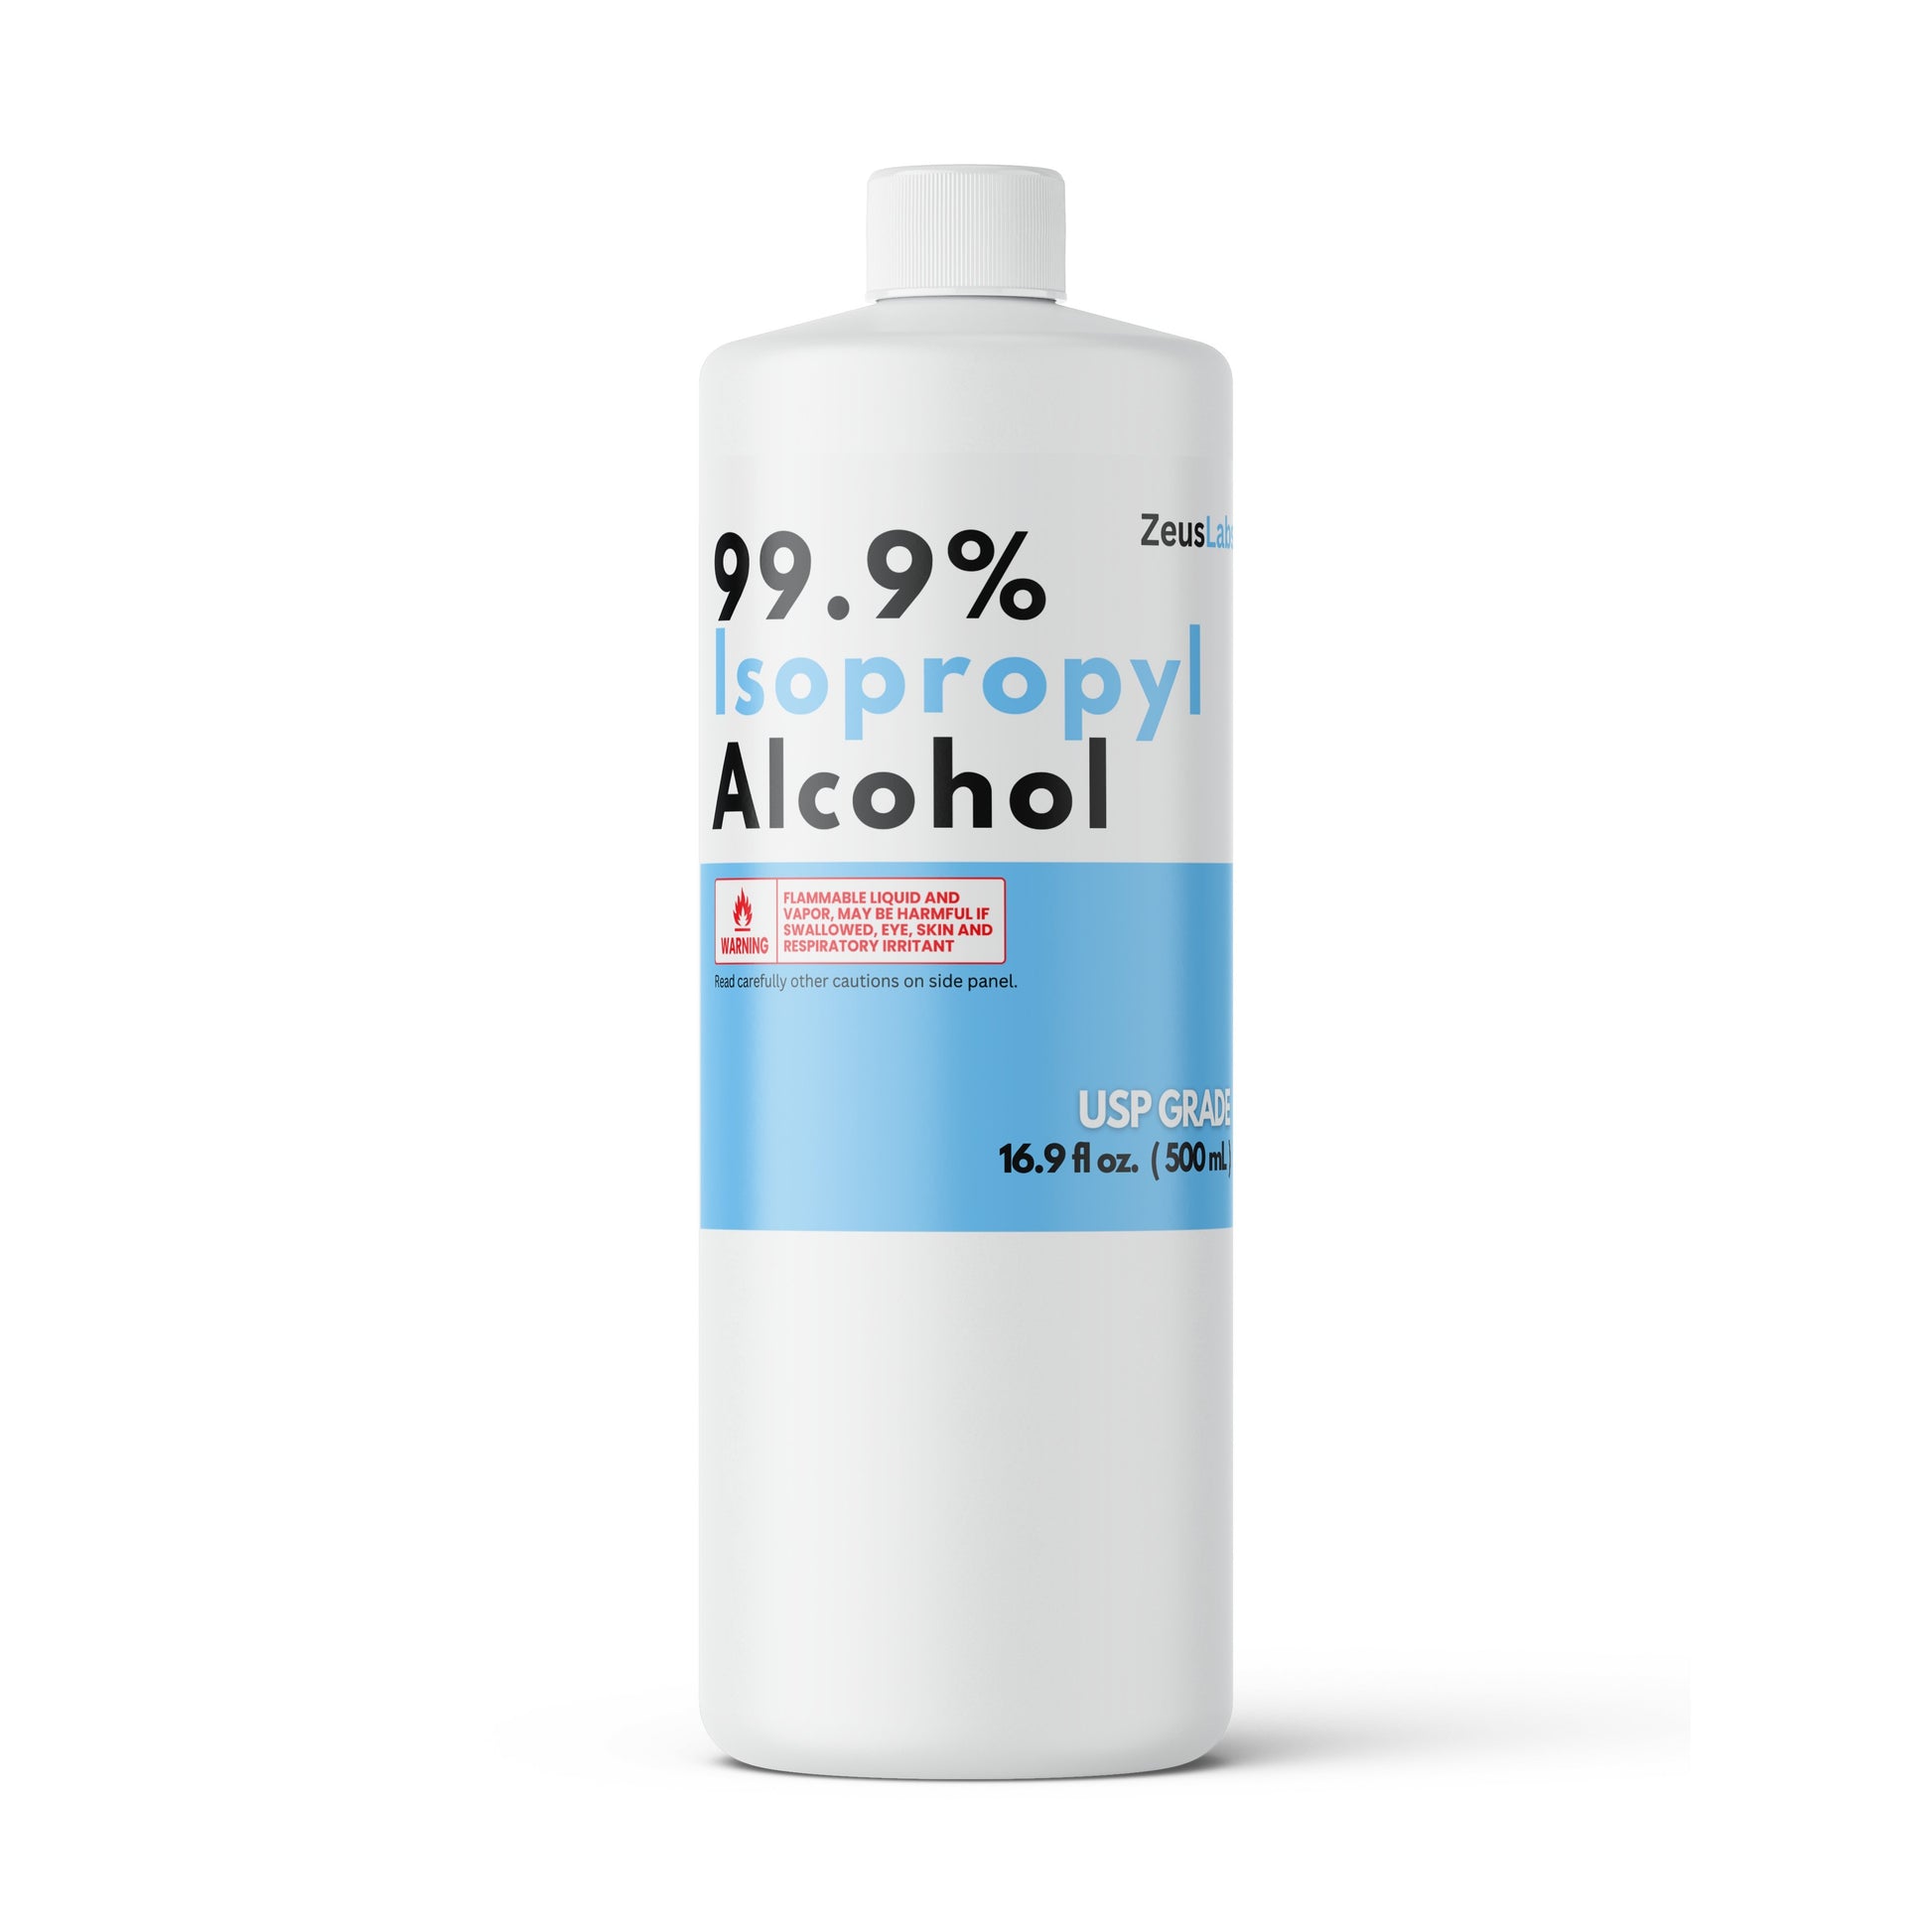 99.9% Isopropyl Absolute/Anhydrous Alcohol - 16 oz